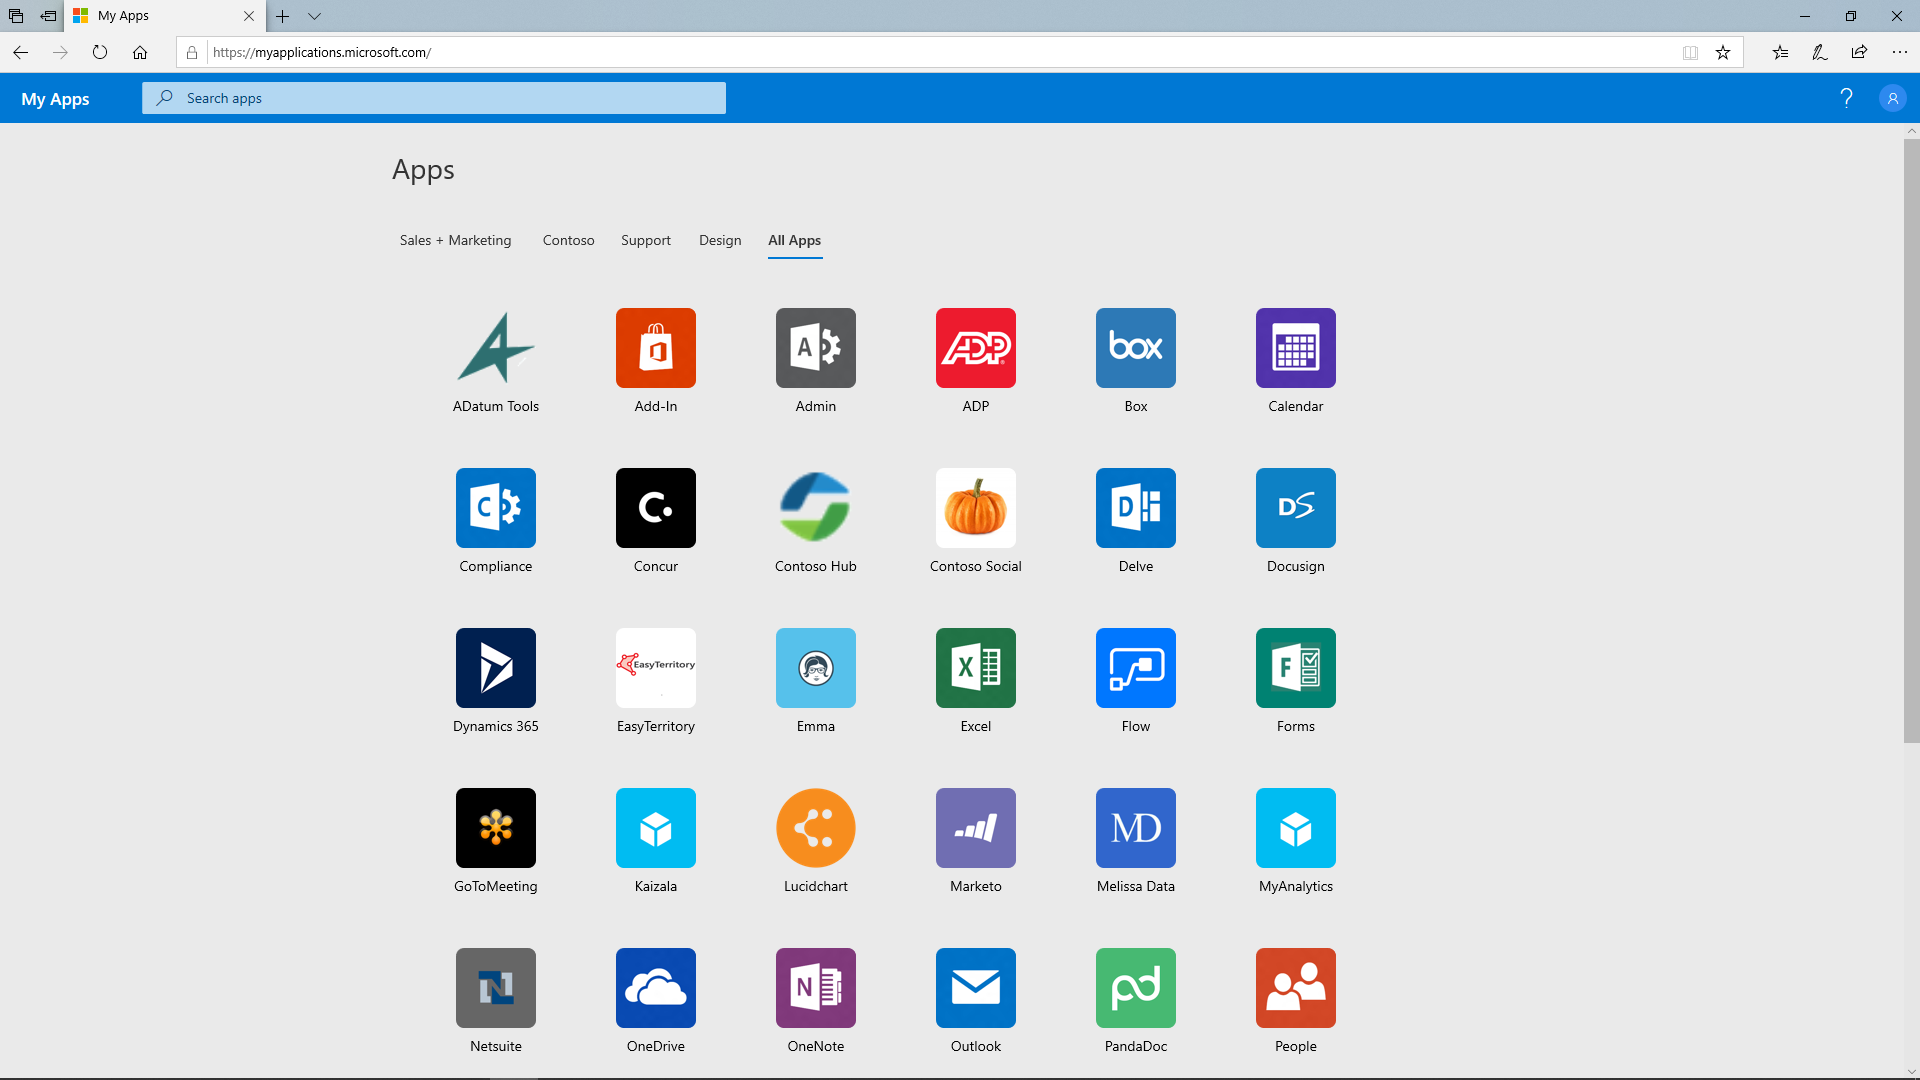 Screenshot showing apps in the My Apps portal.